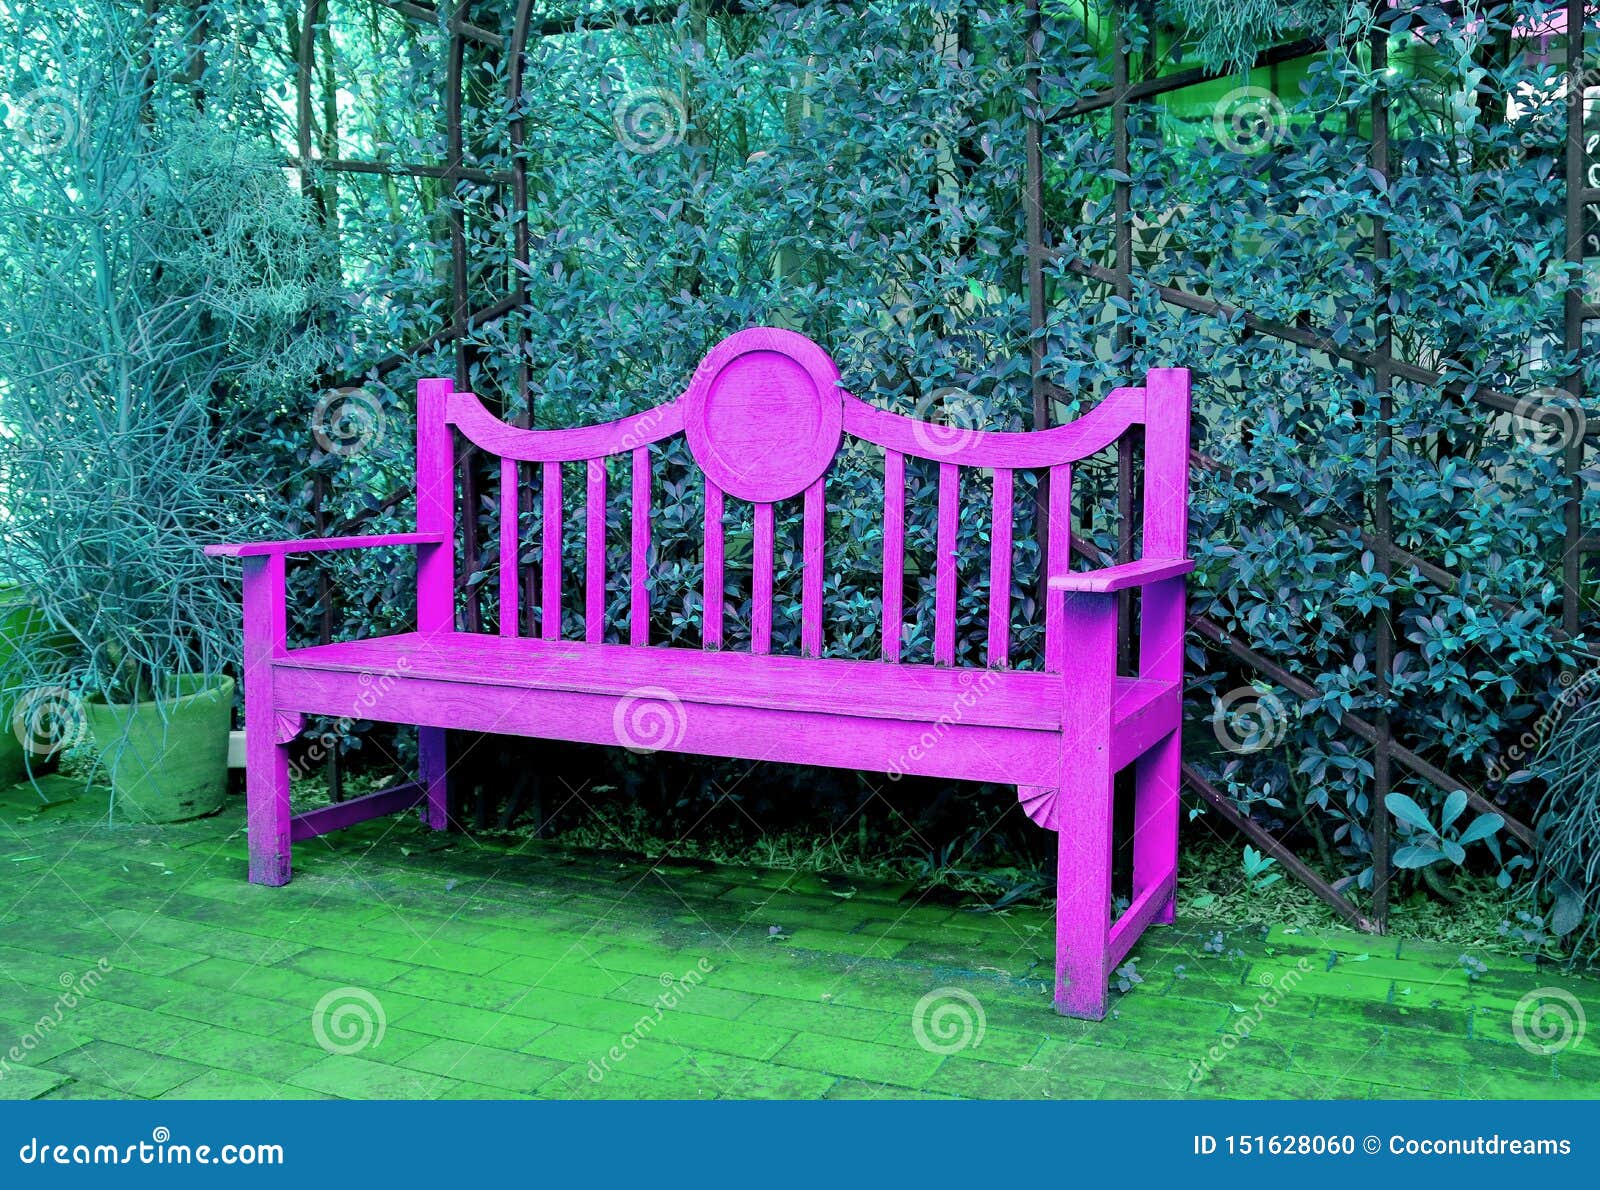 Pop Art Style Vivid Pink Wooden Bench In Turquoise Blue Colored